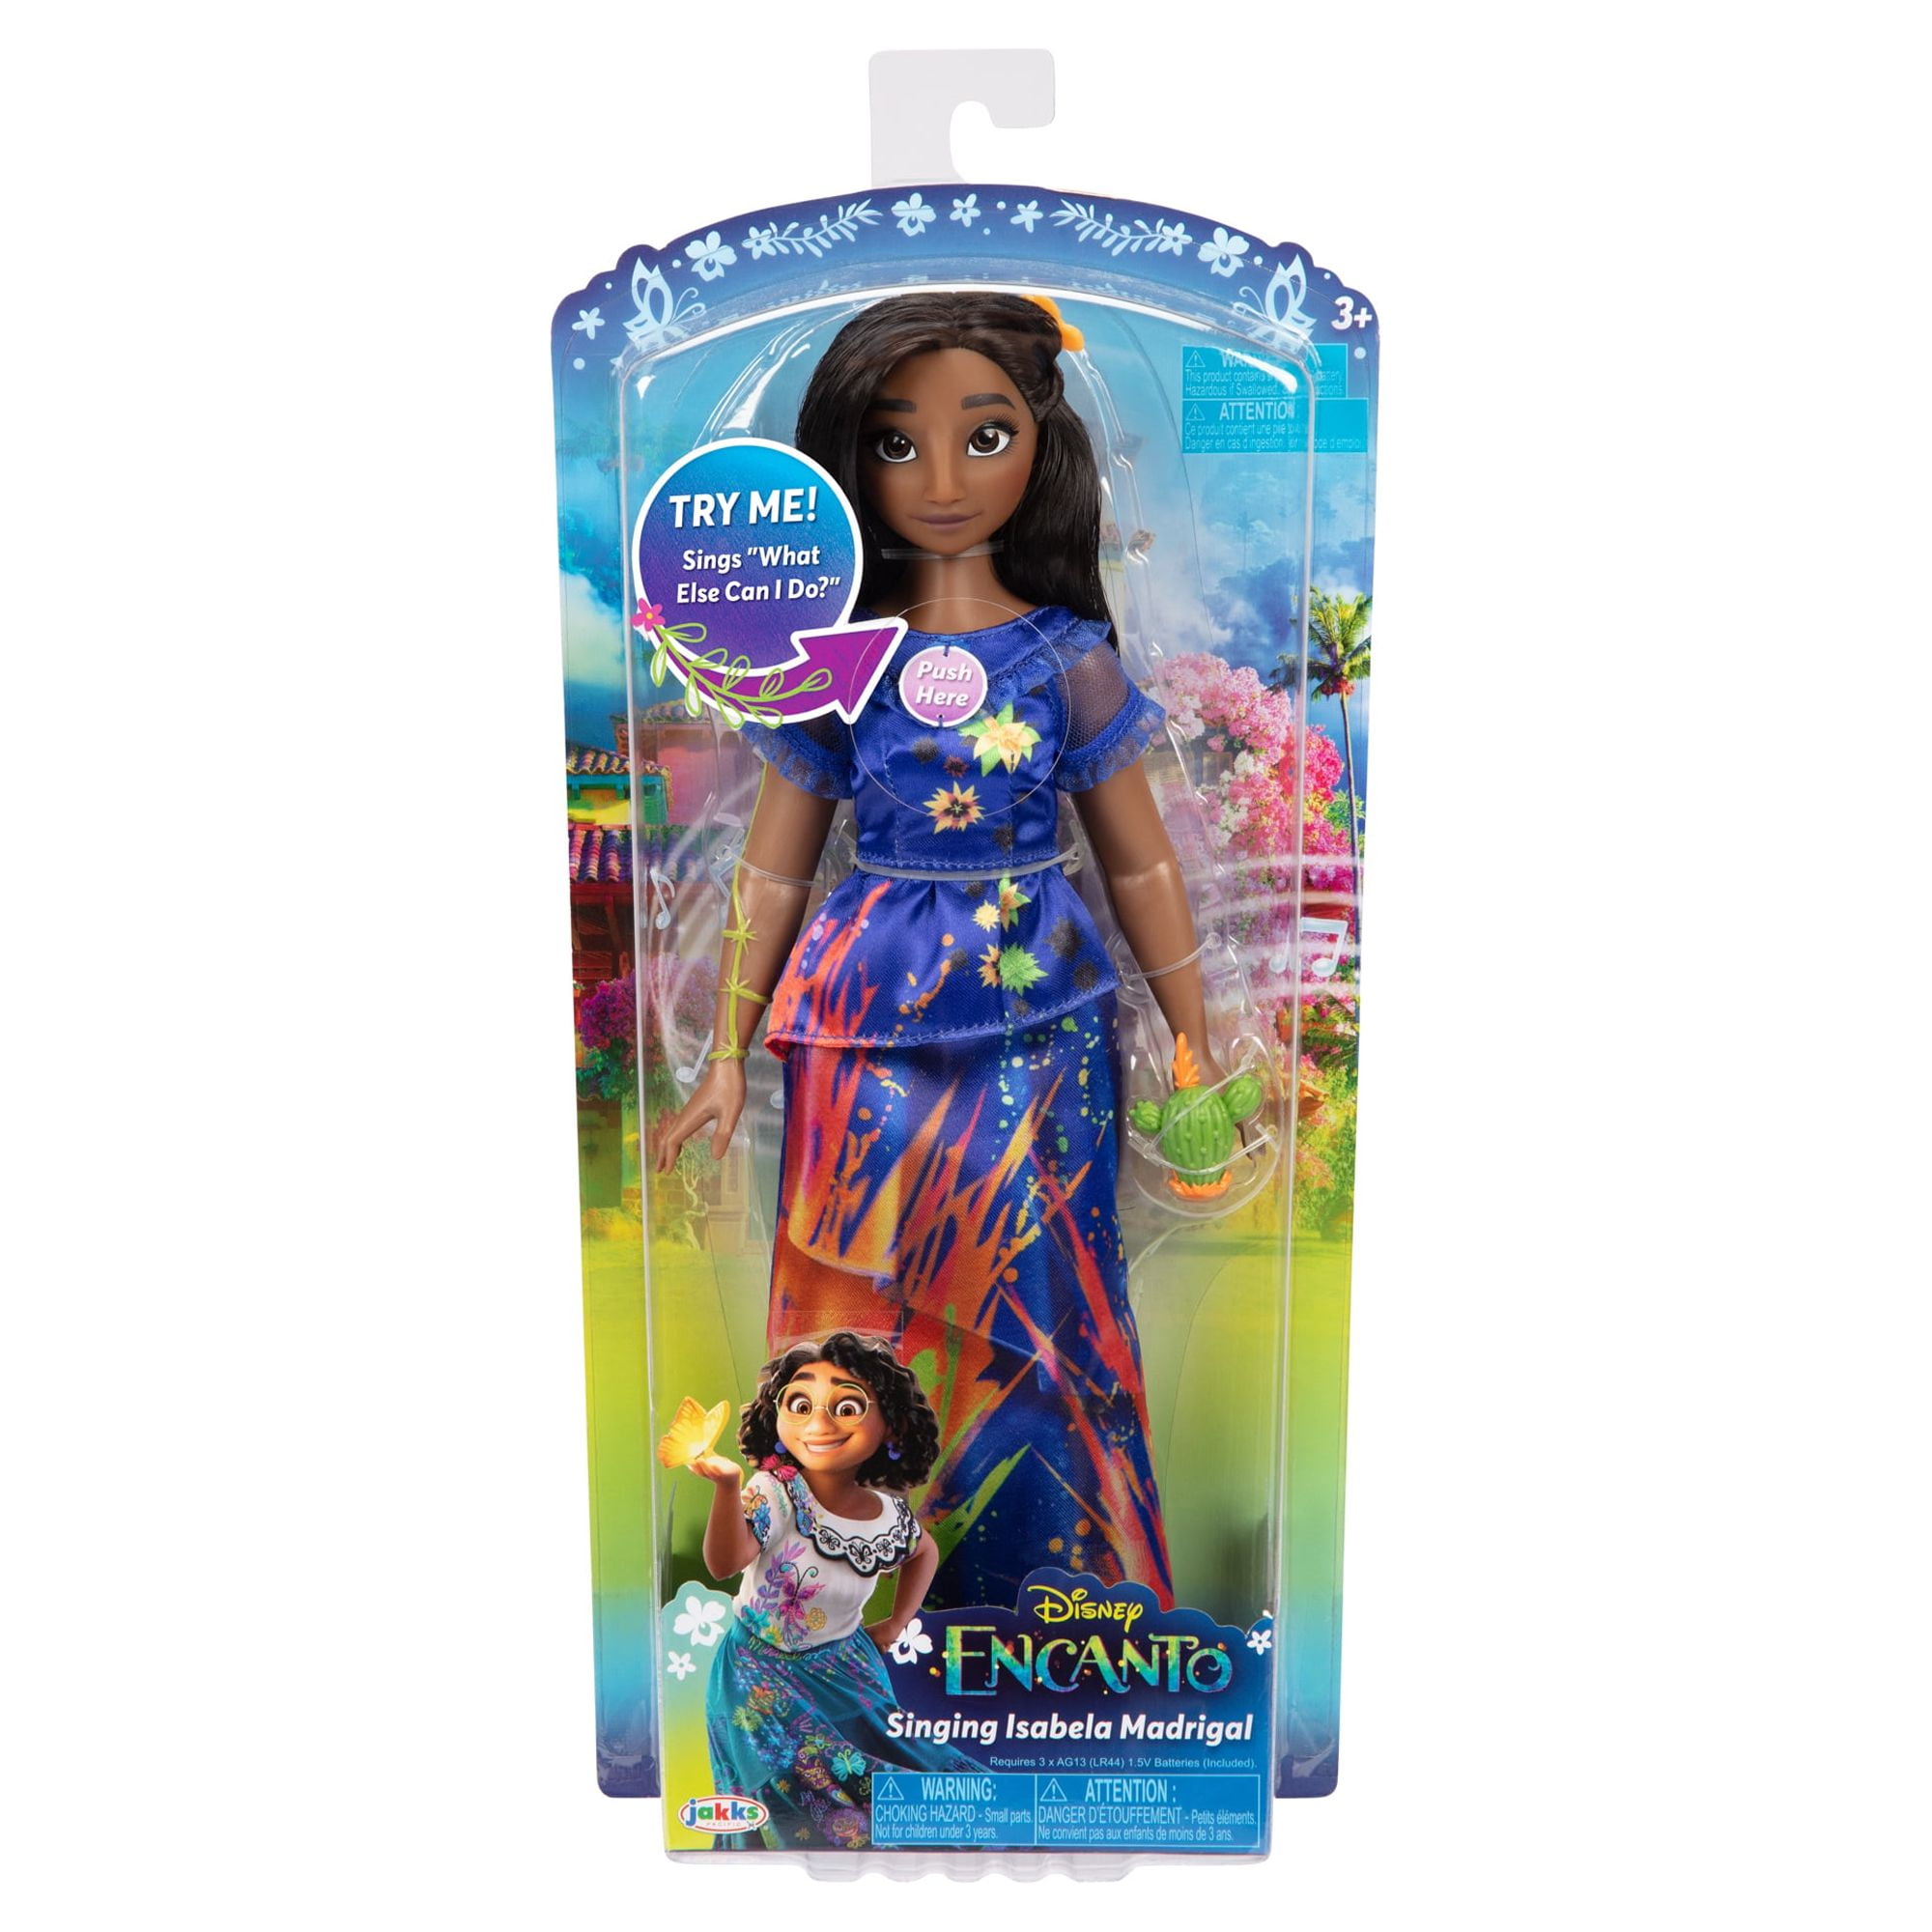 Disney's Encanto Isabela 11 inch Singing Feature Fashion Doll for